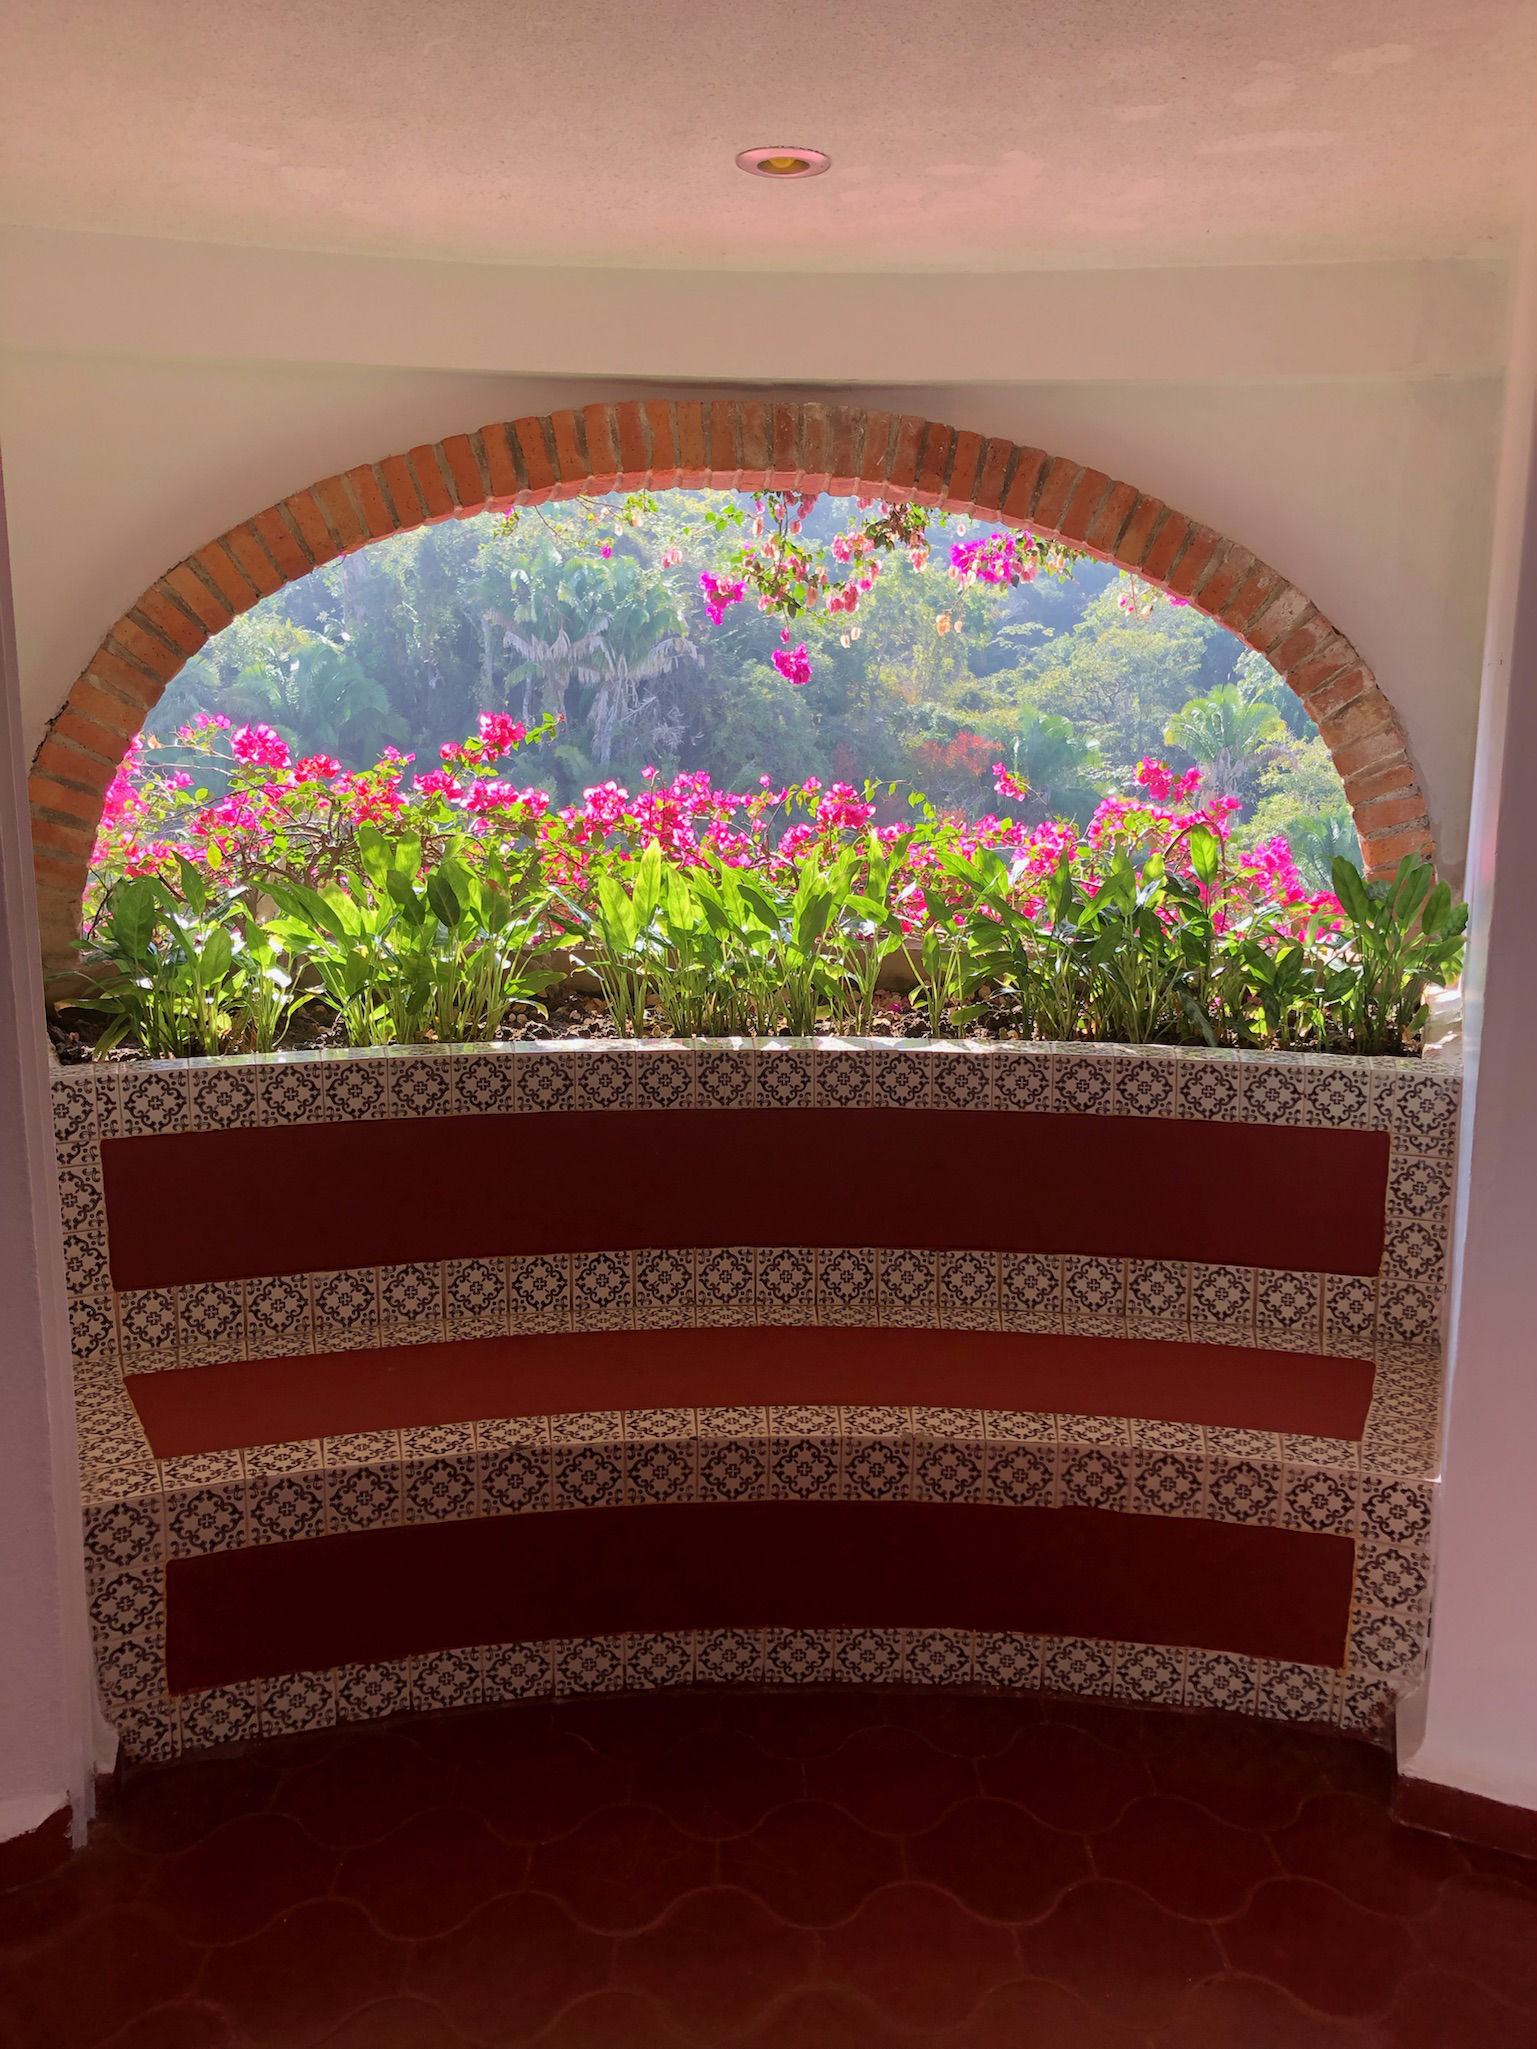 An interior space bordered by bright pink flowers and looking out over a vibrant, sunny landscape